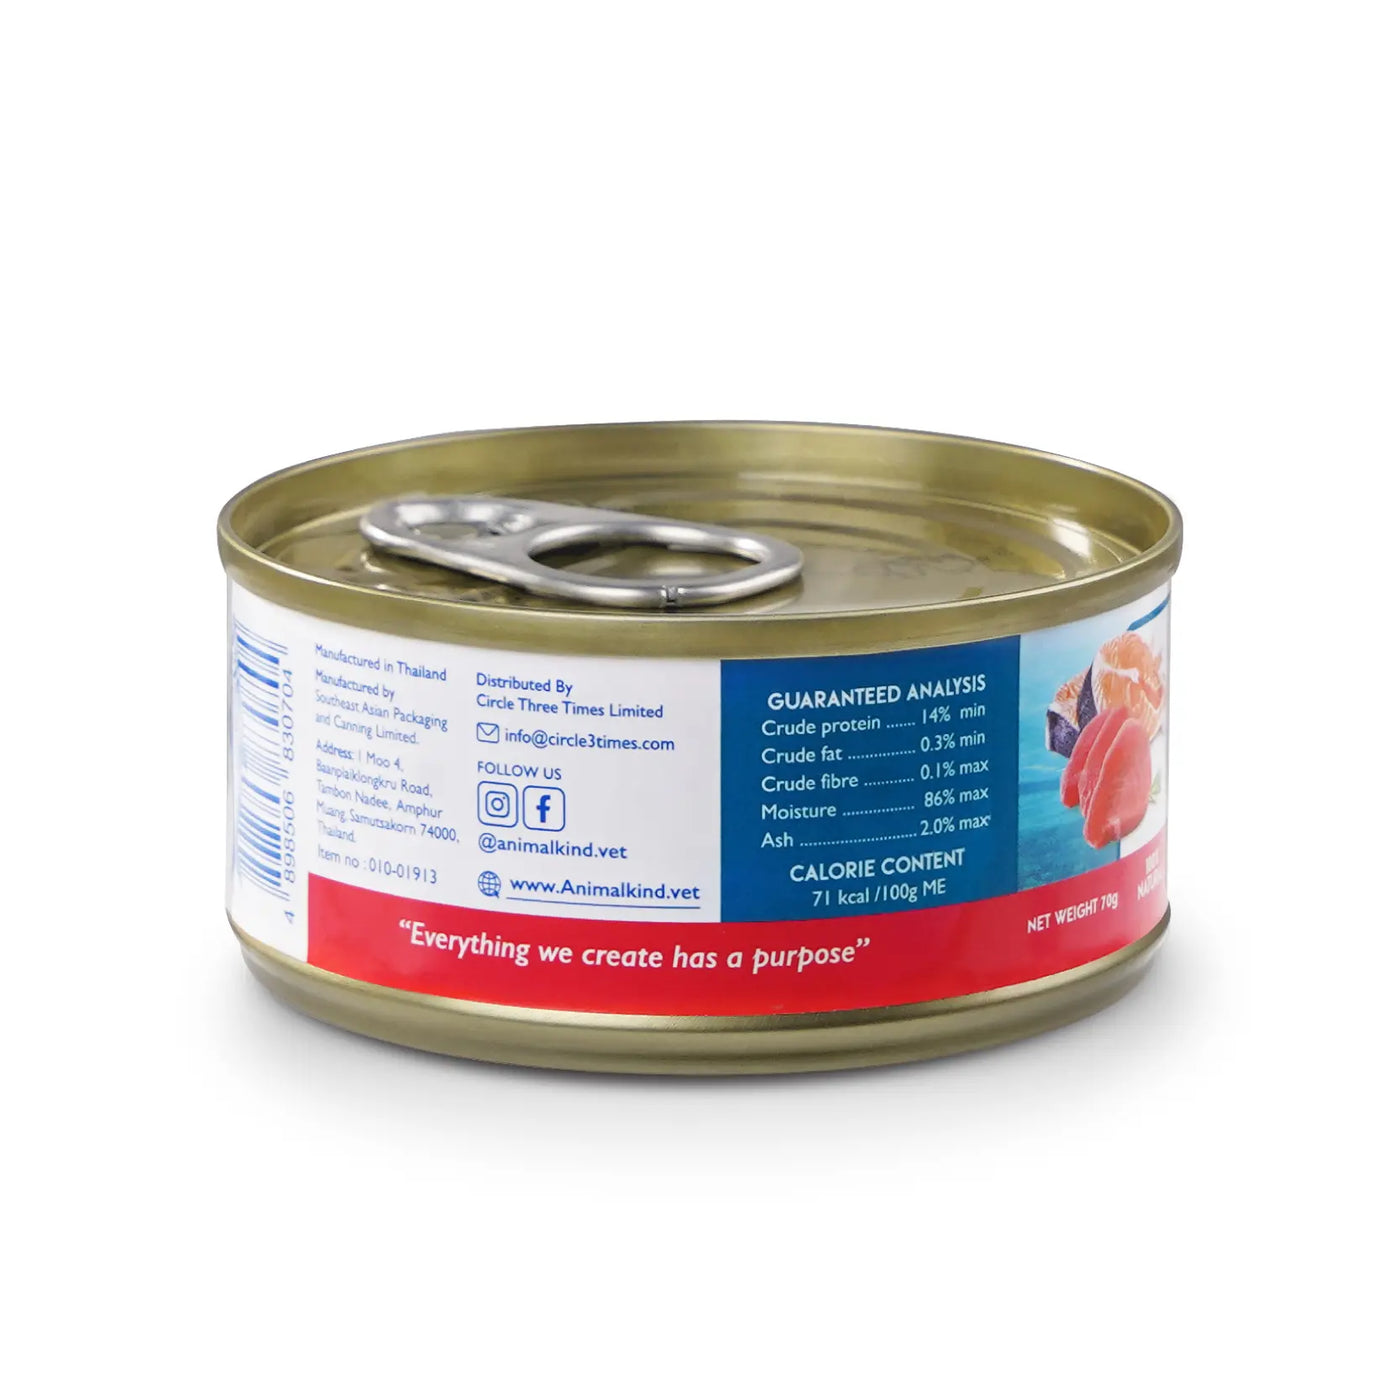 Animalkind Tuna & Salmon Feast Cans for Cats and Dogs